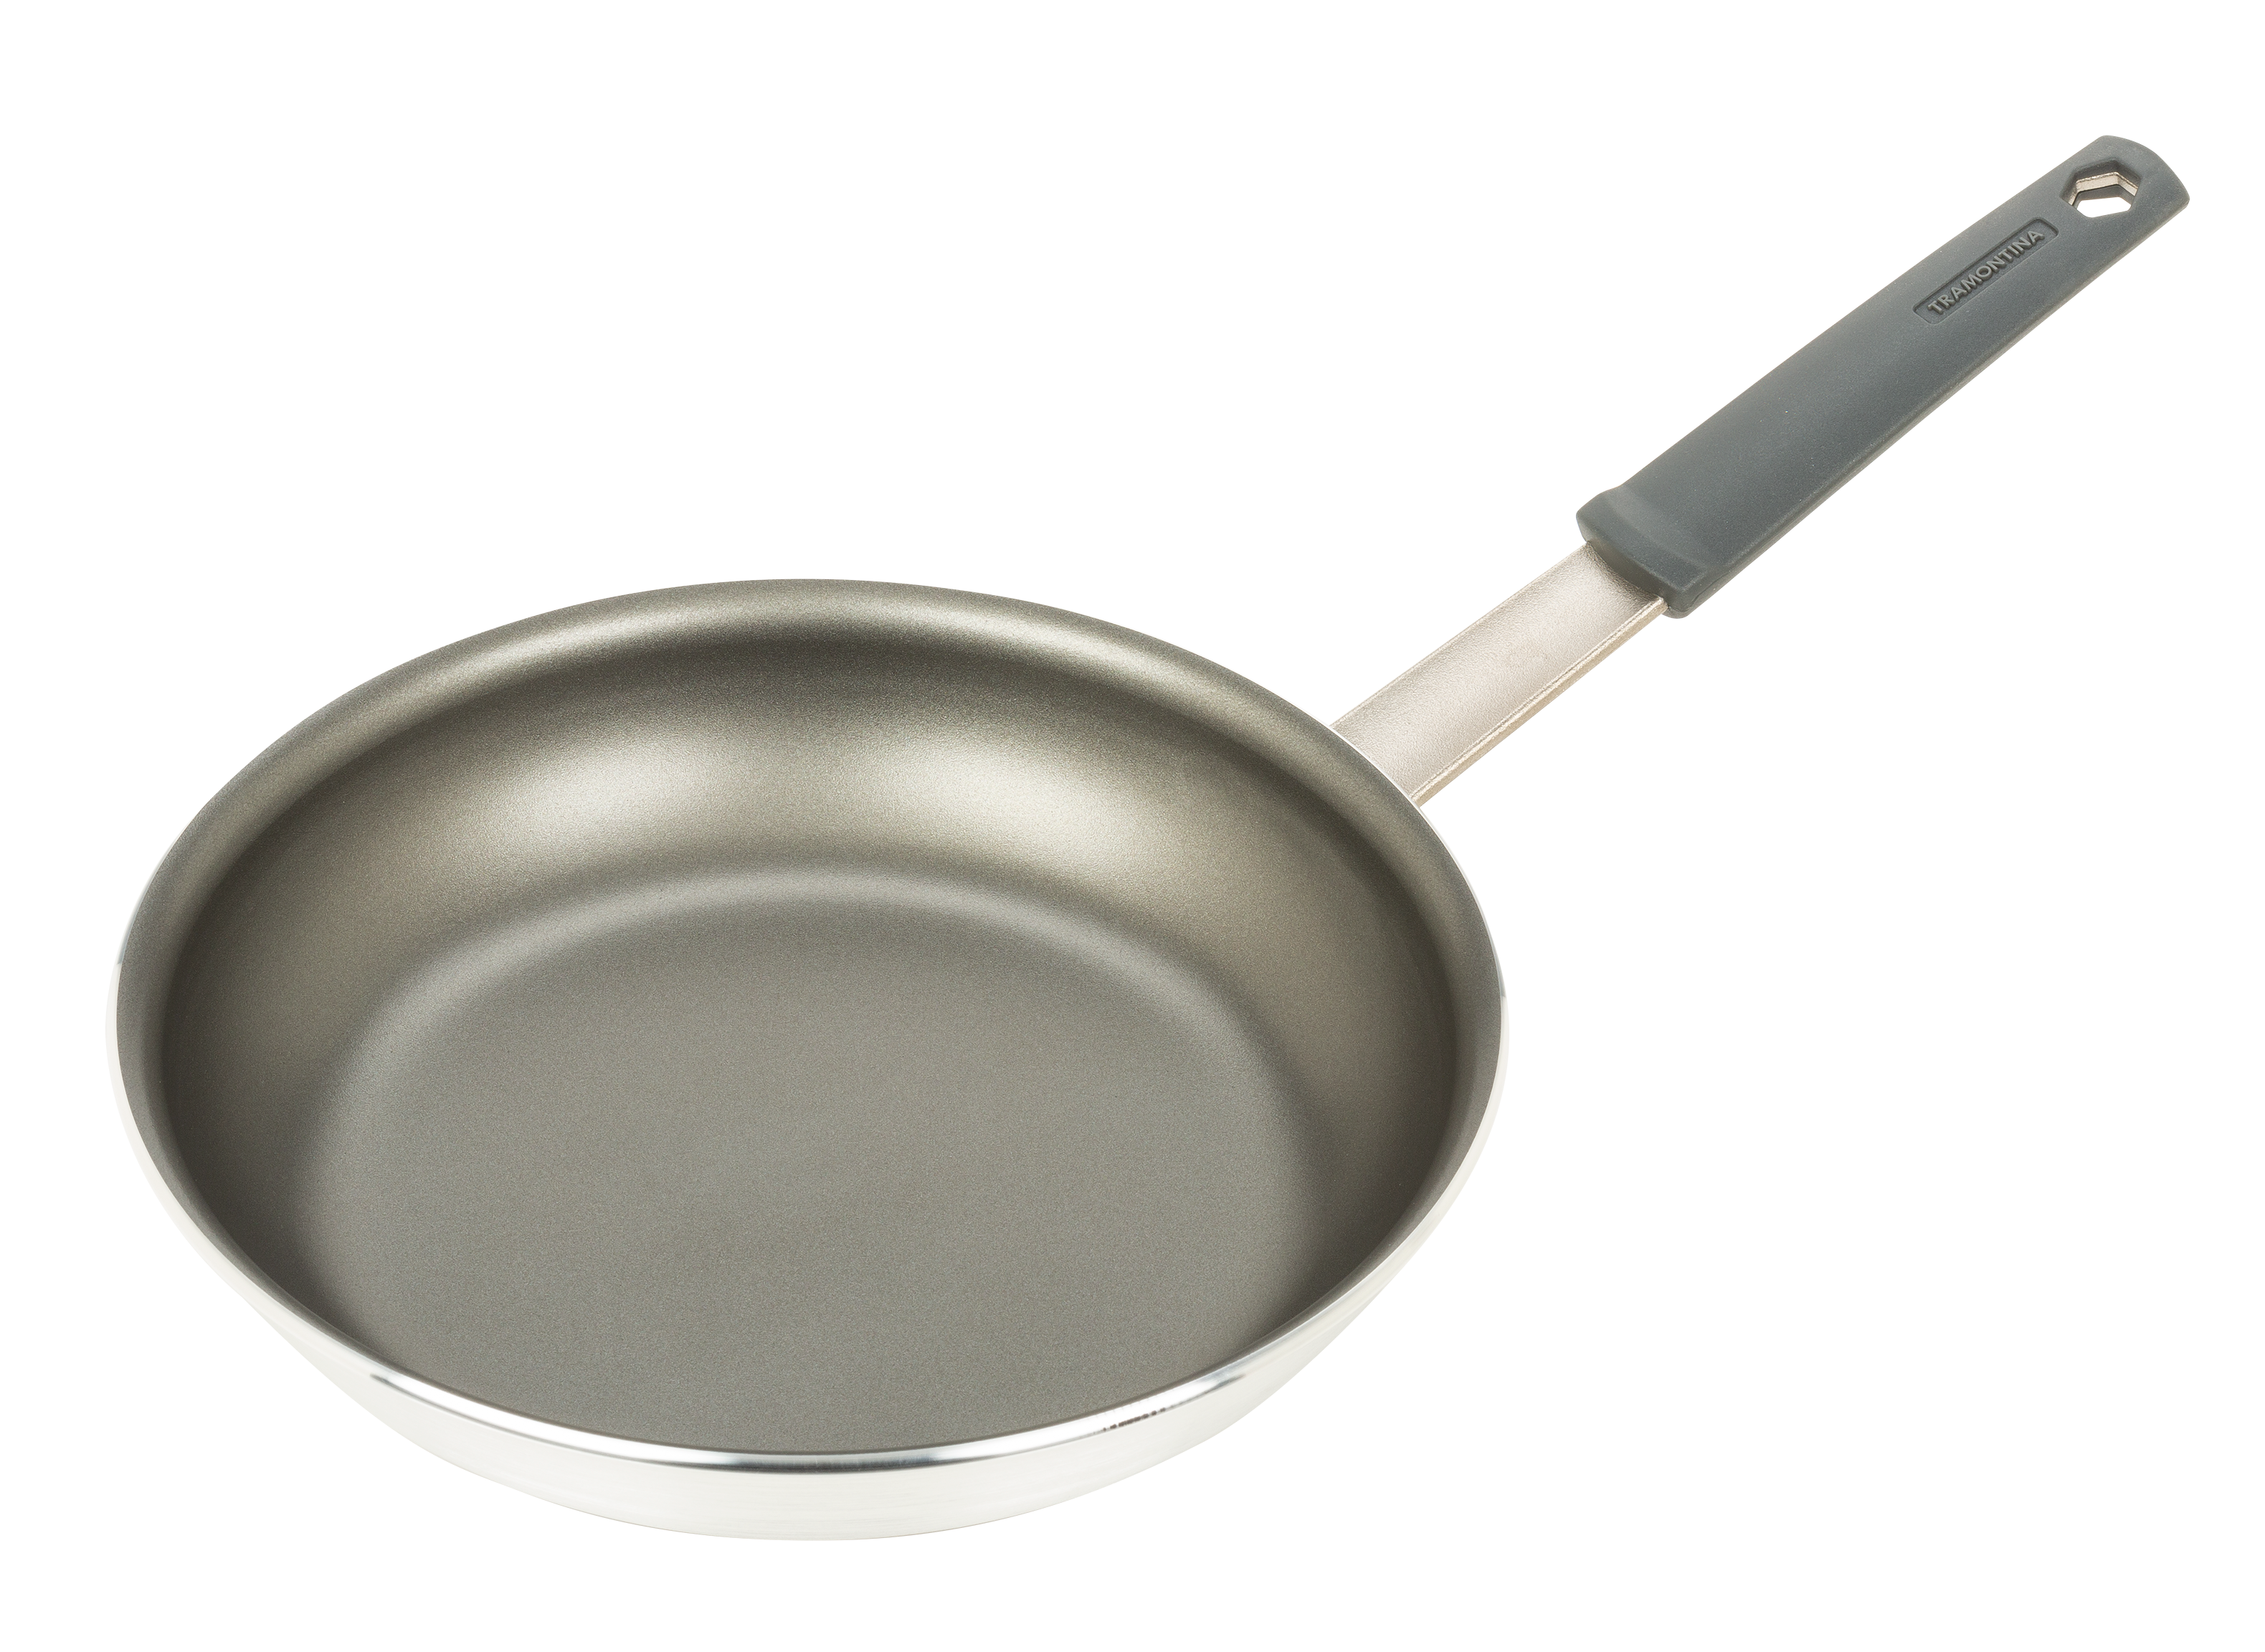 https://crdms.images.consumerreports.org/prod/products/cr/models/405129-frying-pans-nonstick-tramontina-pro-fusion-80114-516ds-10025497.png